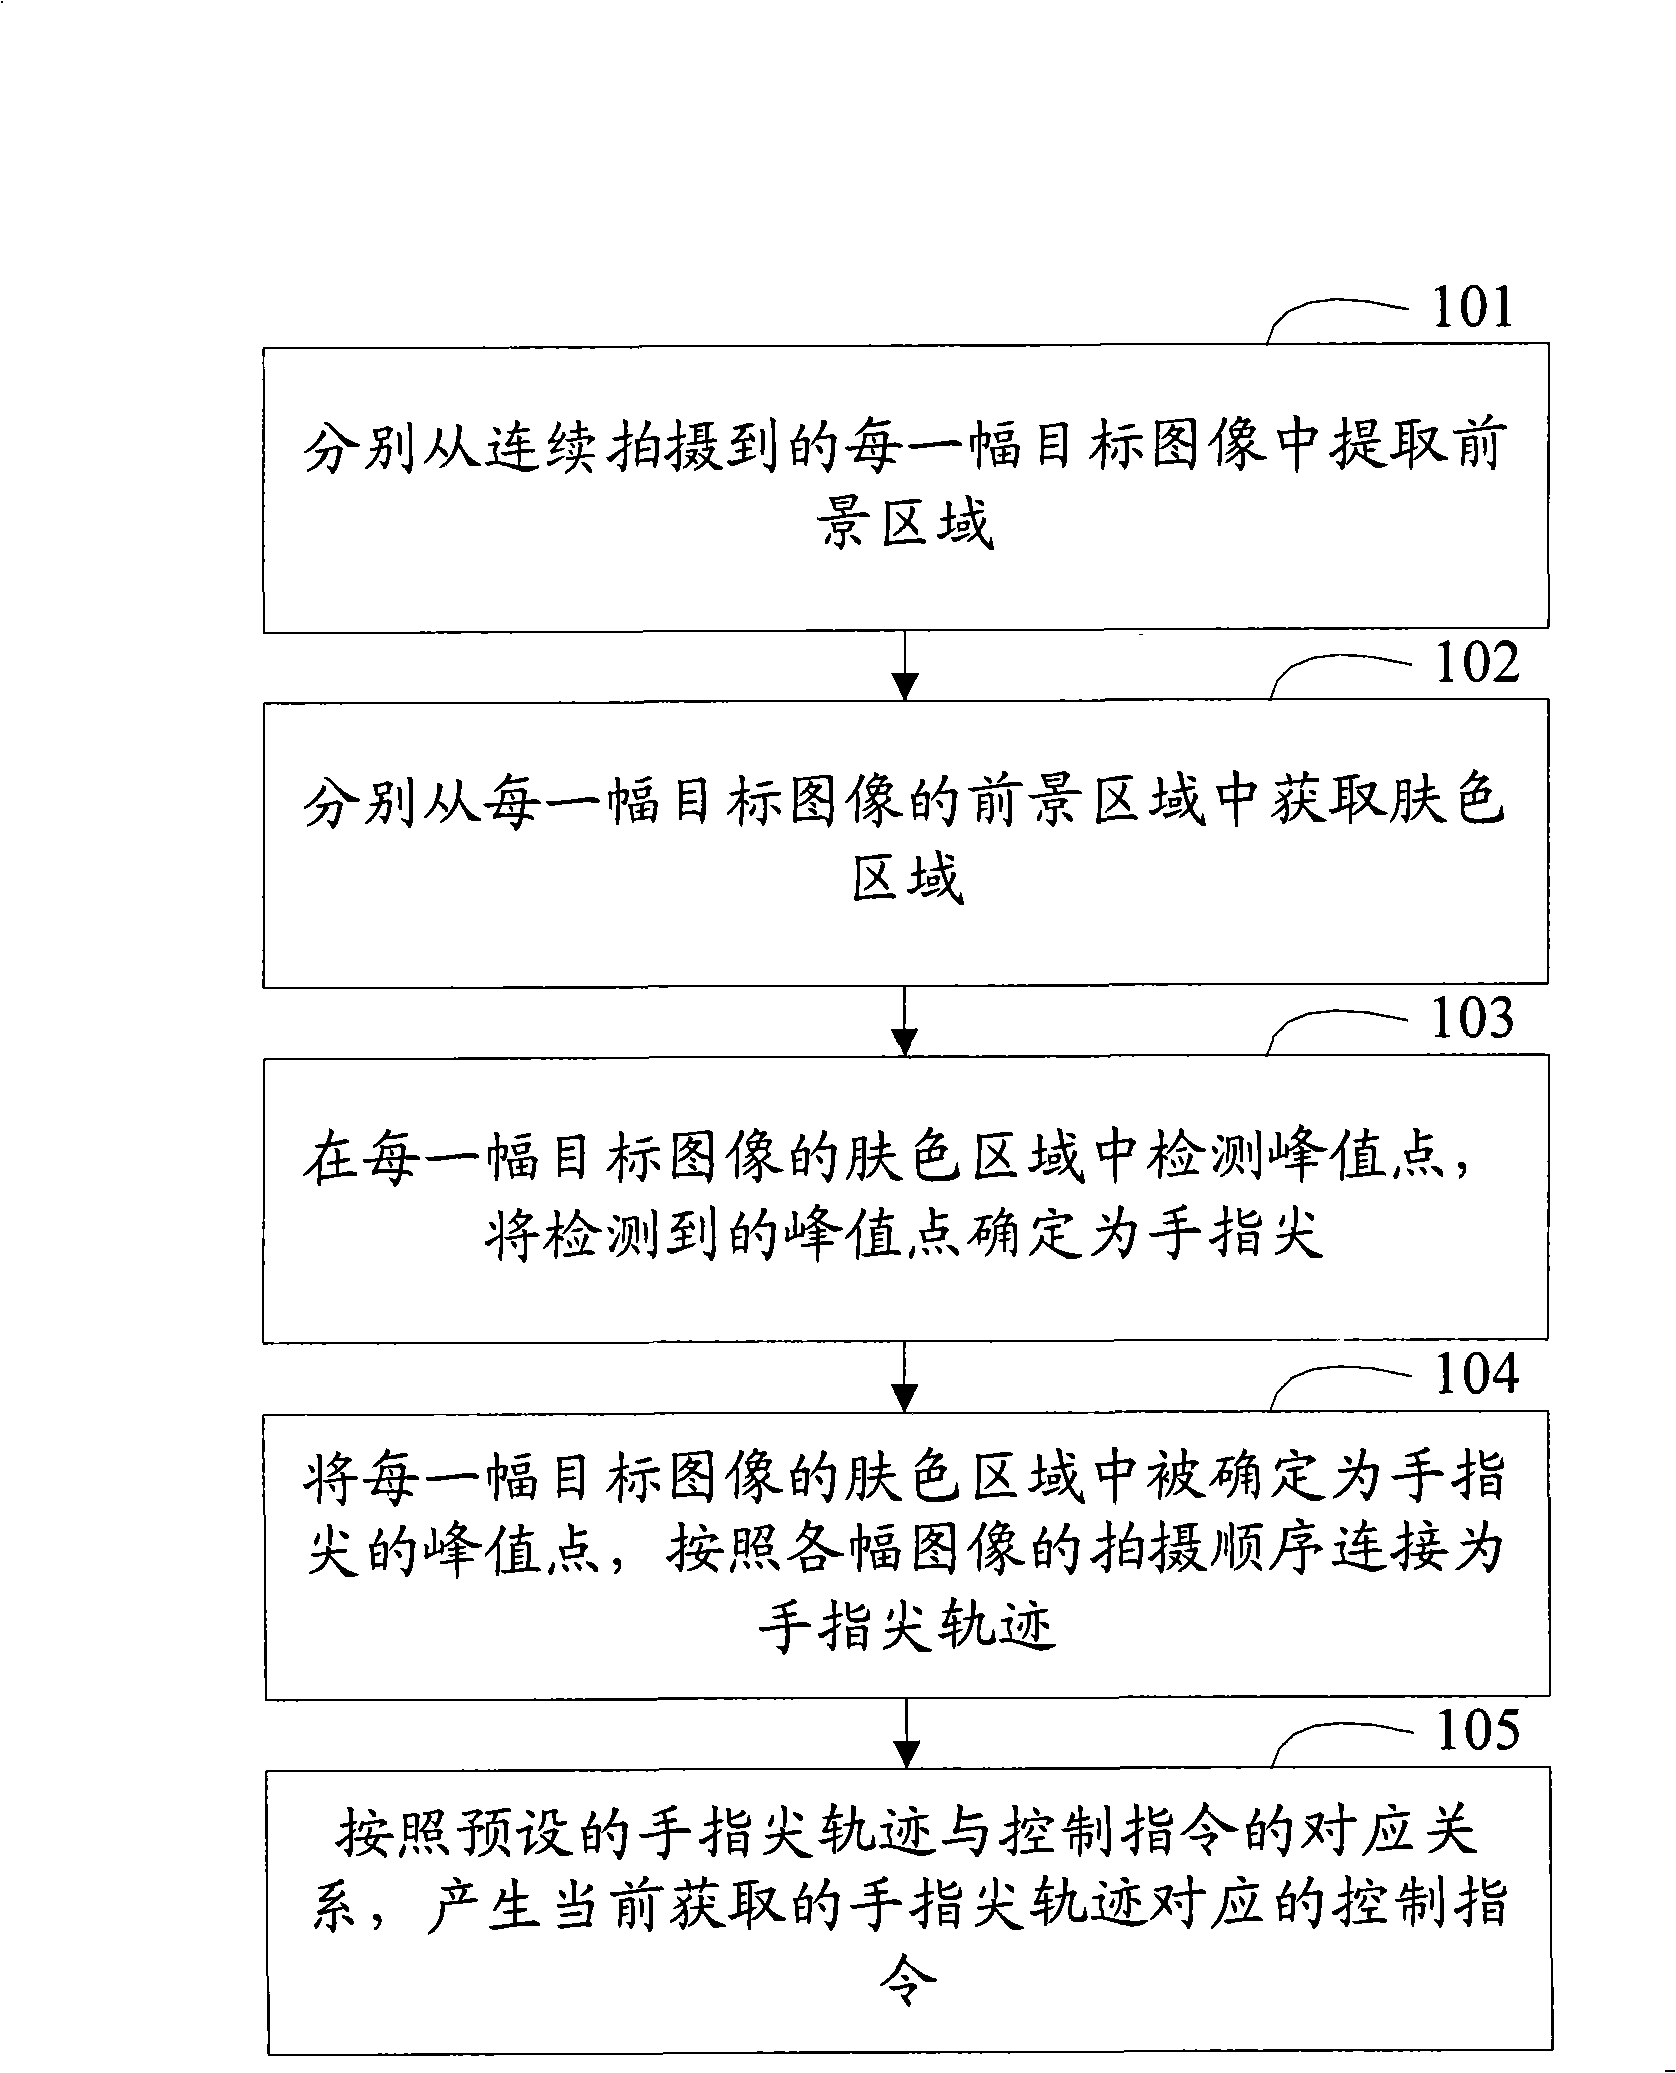 Method and apparatus for acquiring fingertip track